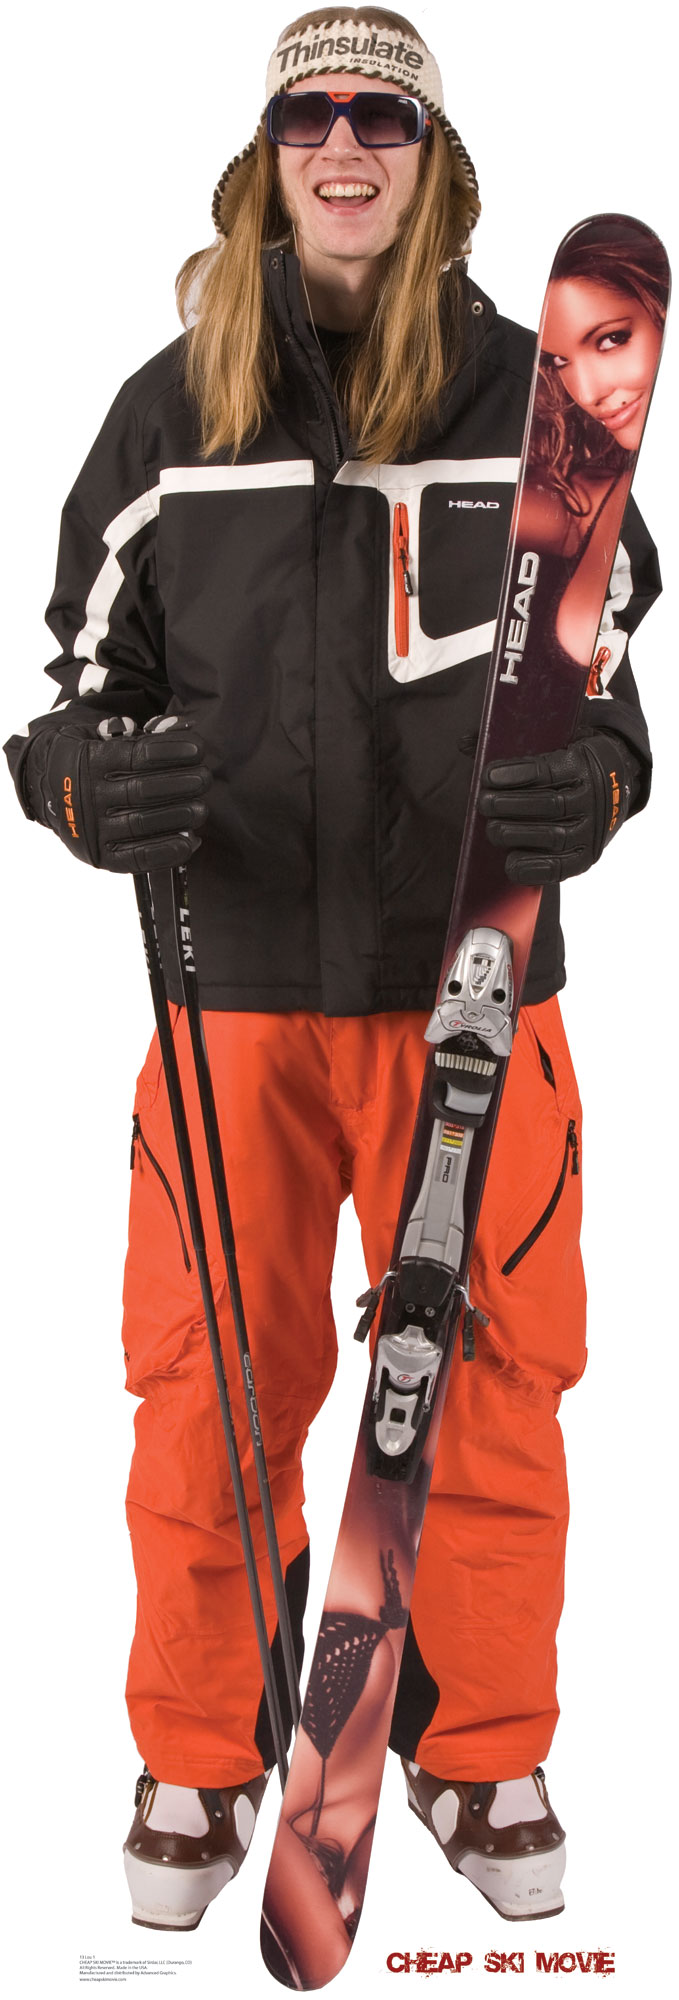 UPC 082033000134 product image for Advanced Graphics Lou 2 Cheap Ski Movie Cut-Out Stand Up Poster | upcitemdb.com